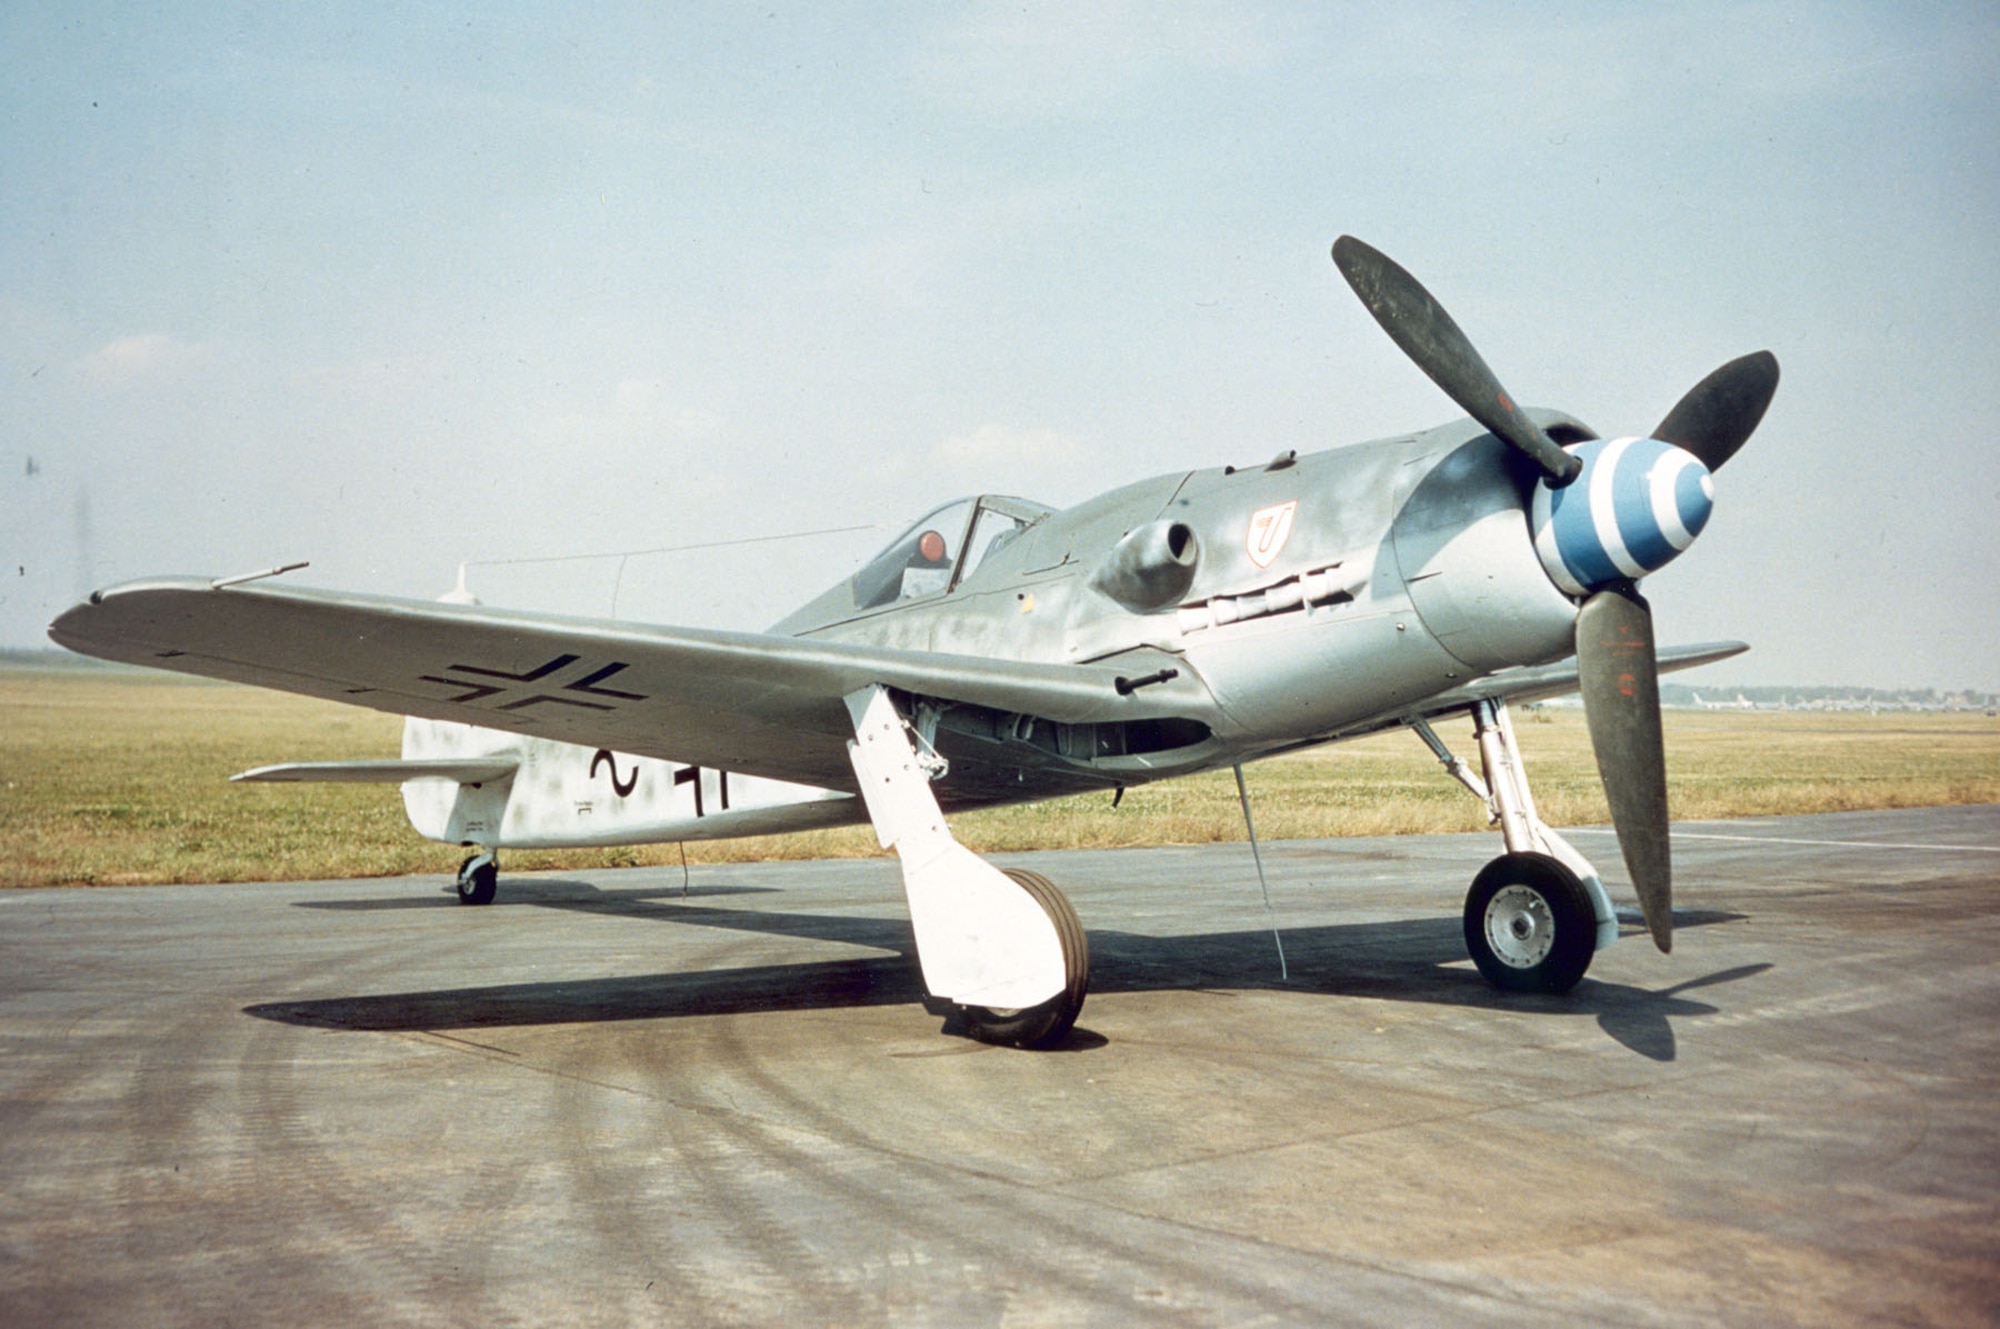 DAYTON, Ohio -- Focke-Wulf Fw 190D-9 at the National Museum of the United States Air Force. (U.S. Air Force photo)